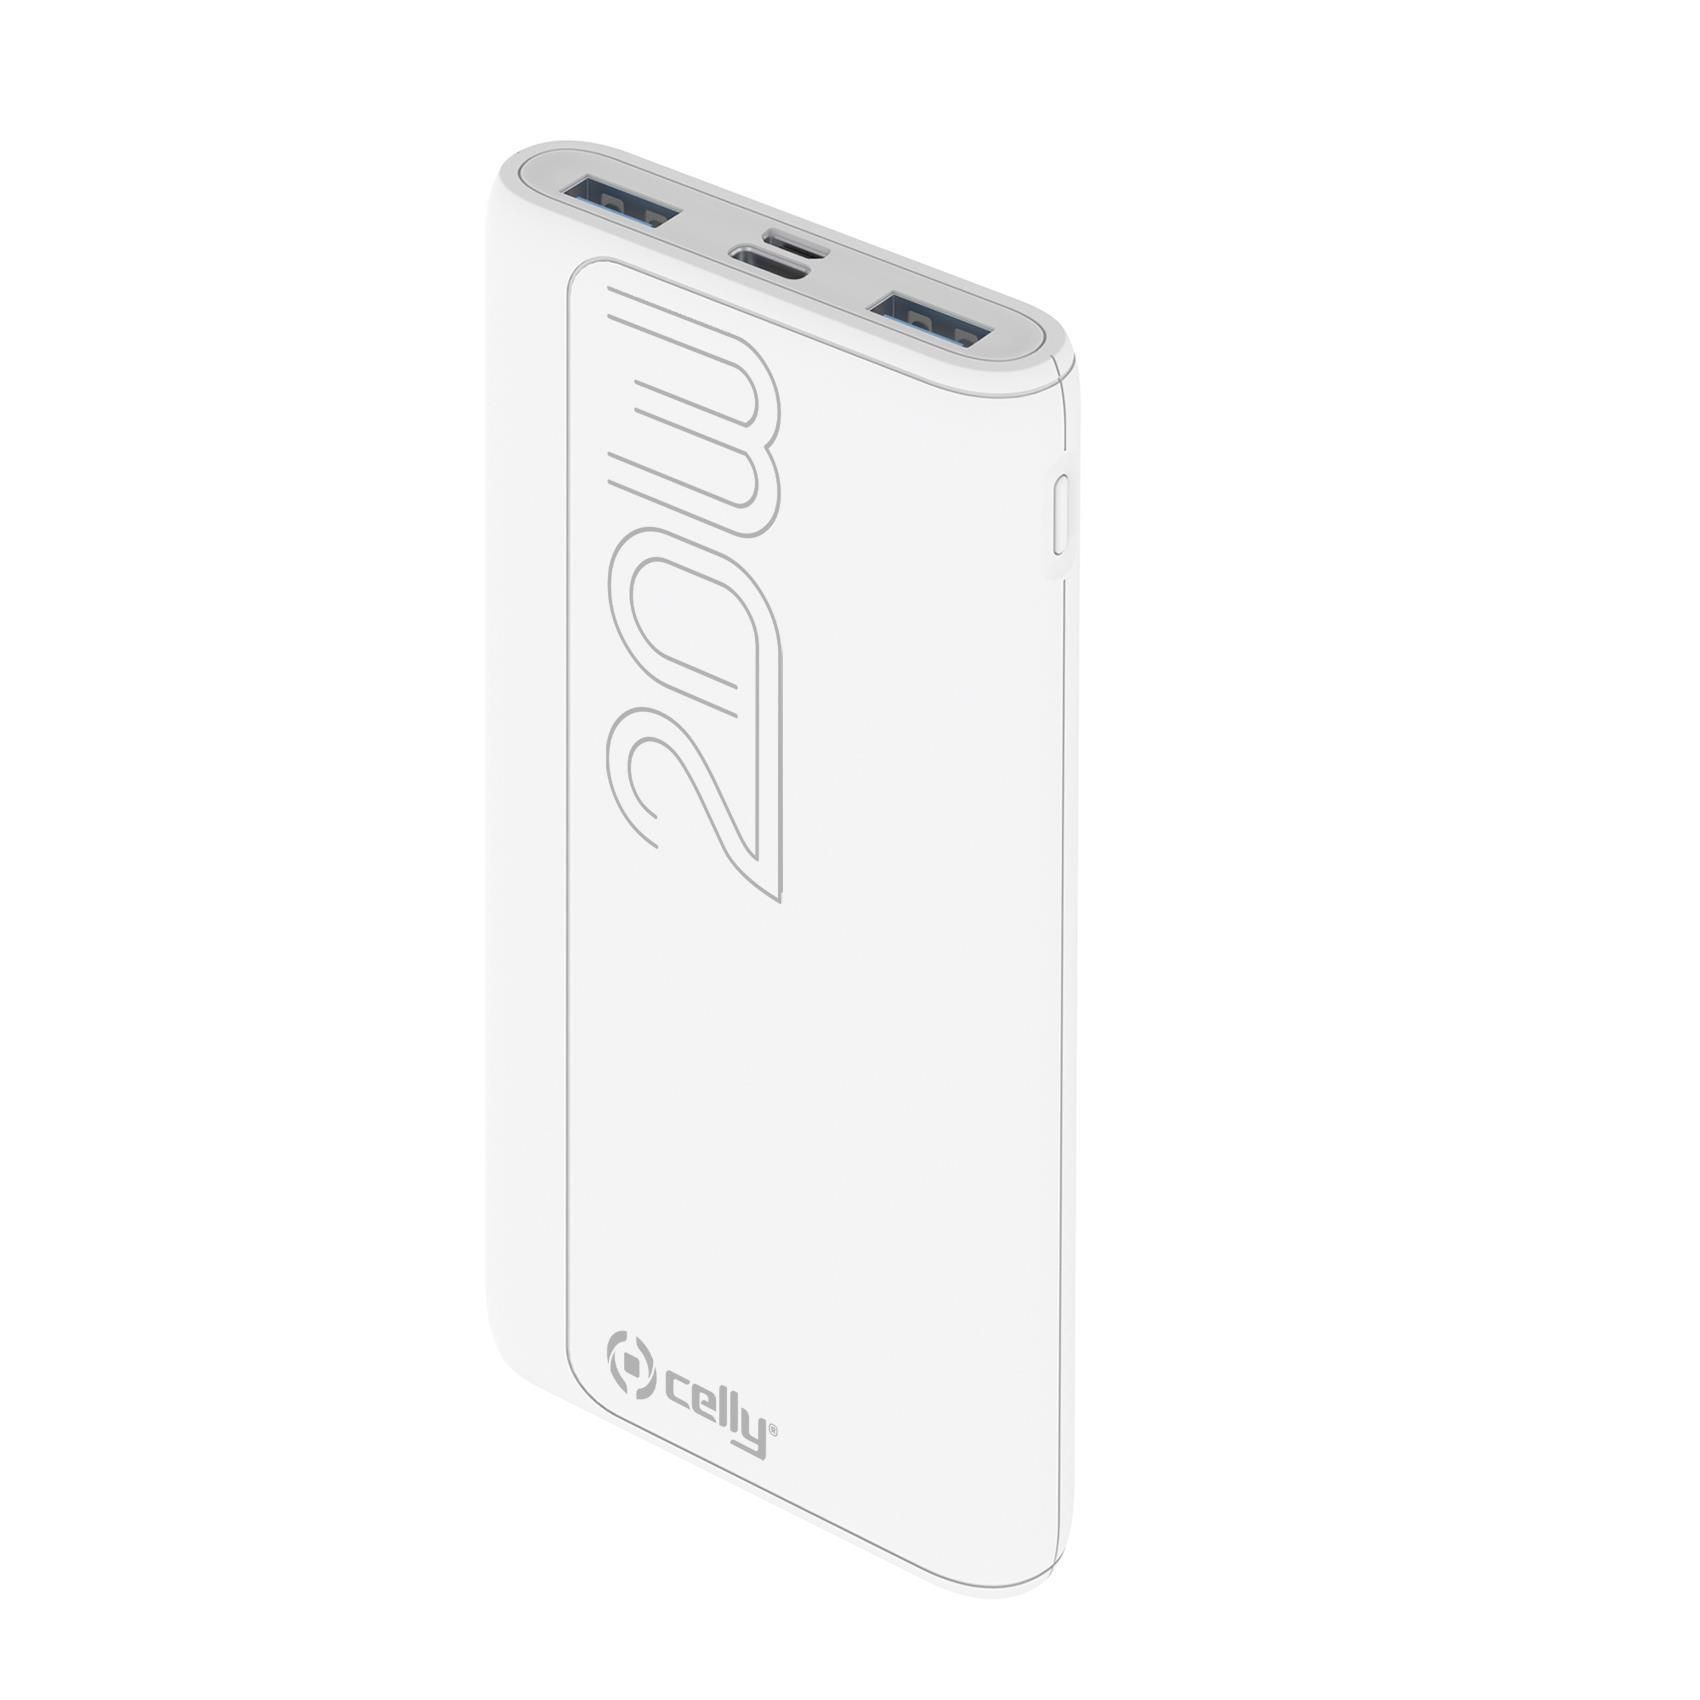 Celly Power Bank Pd